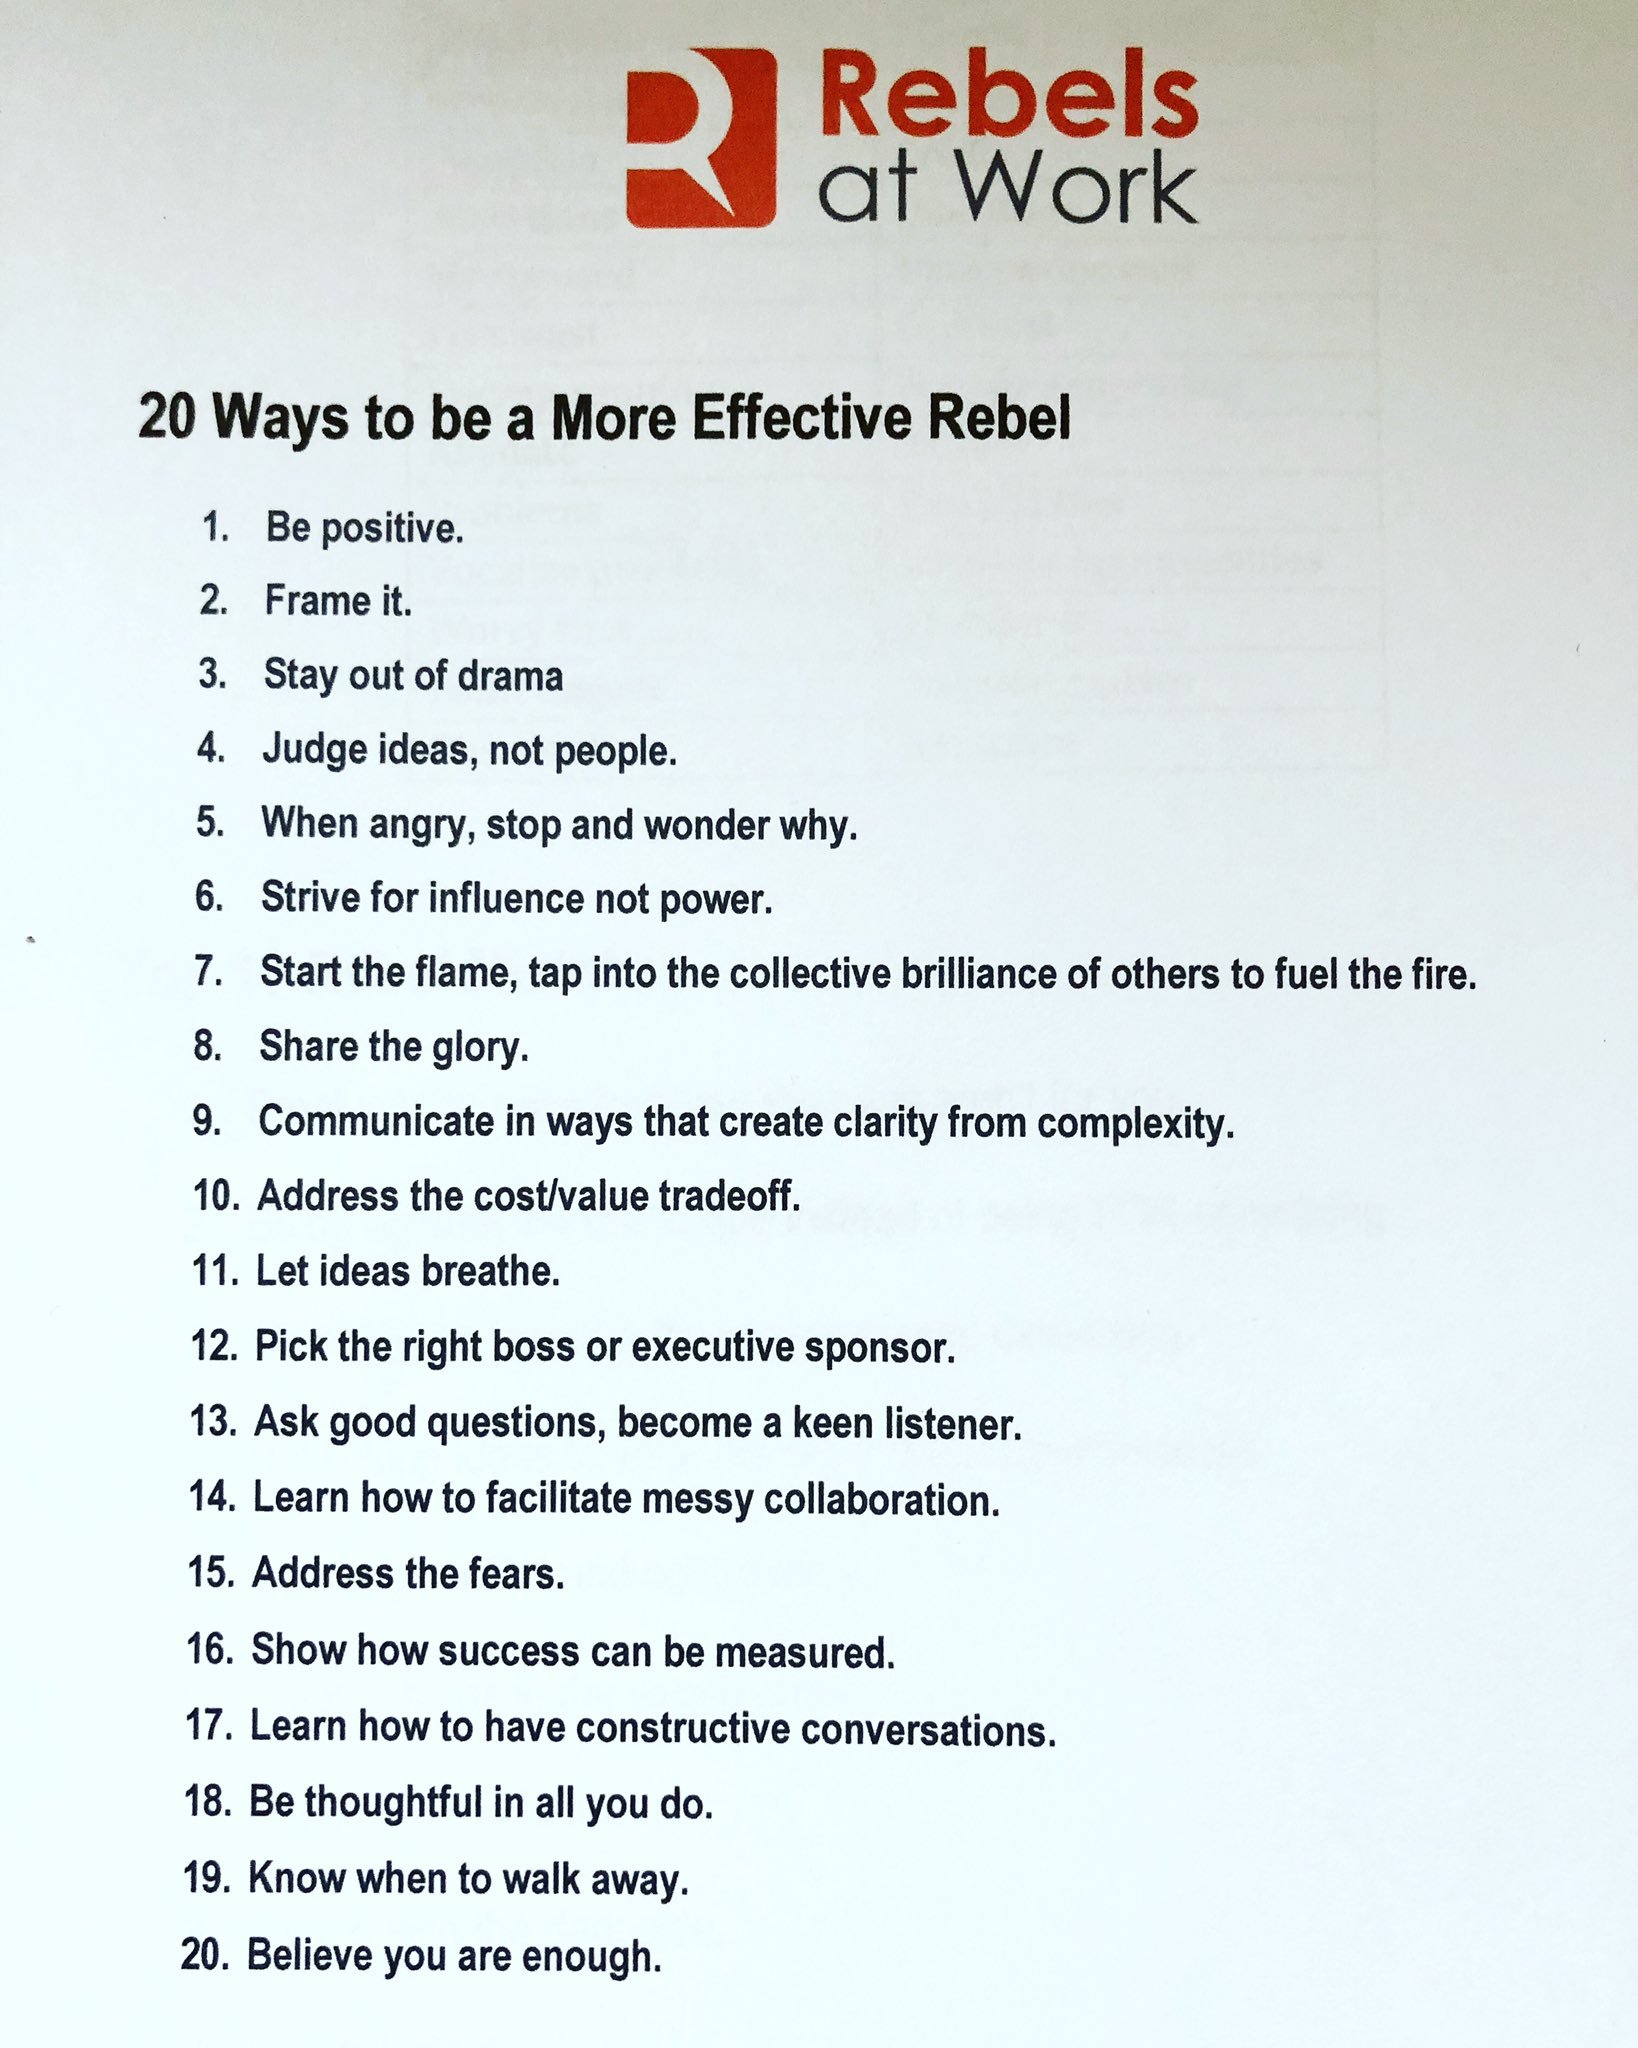 20 ways to be a more effective Rebel.jpg